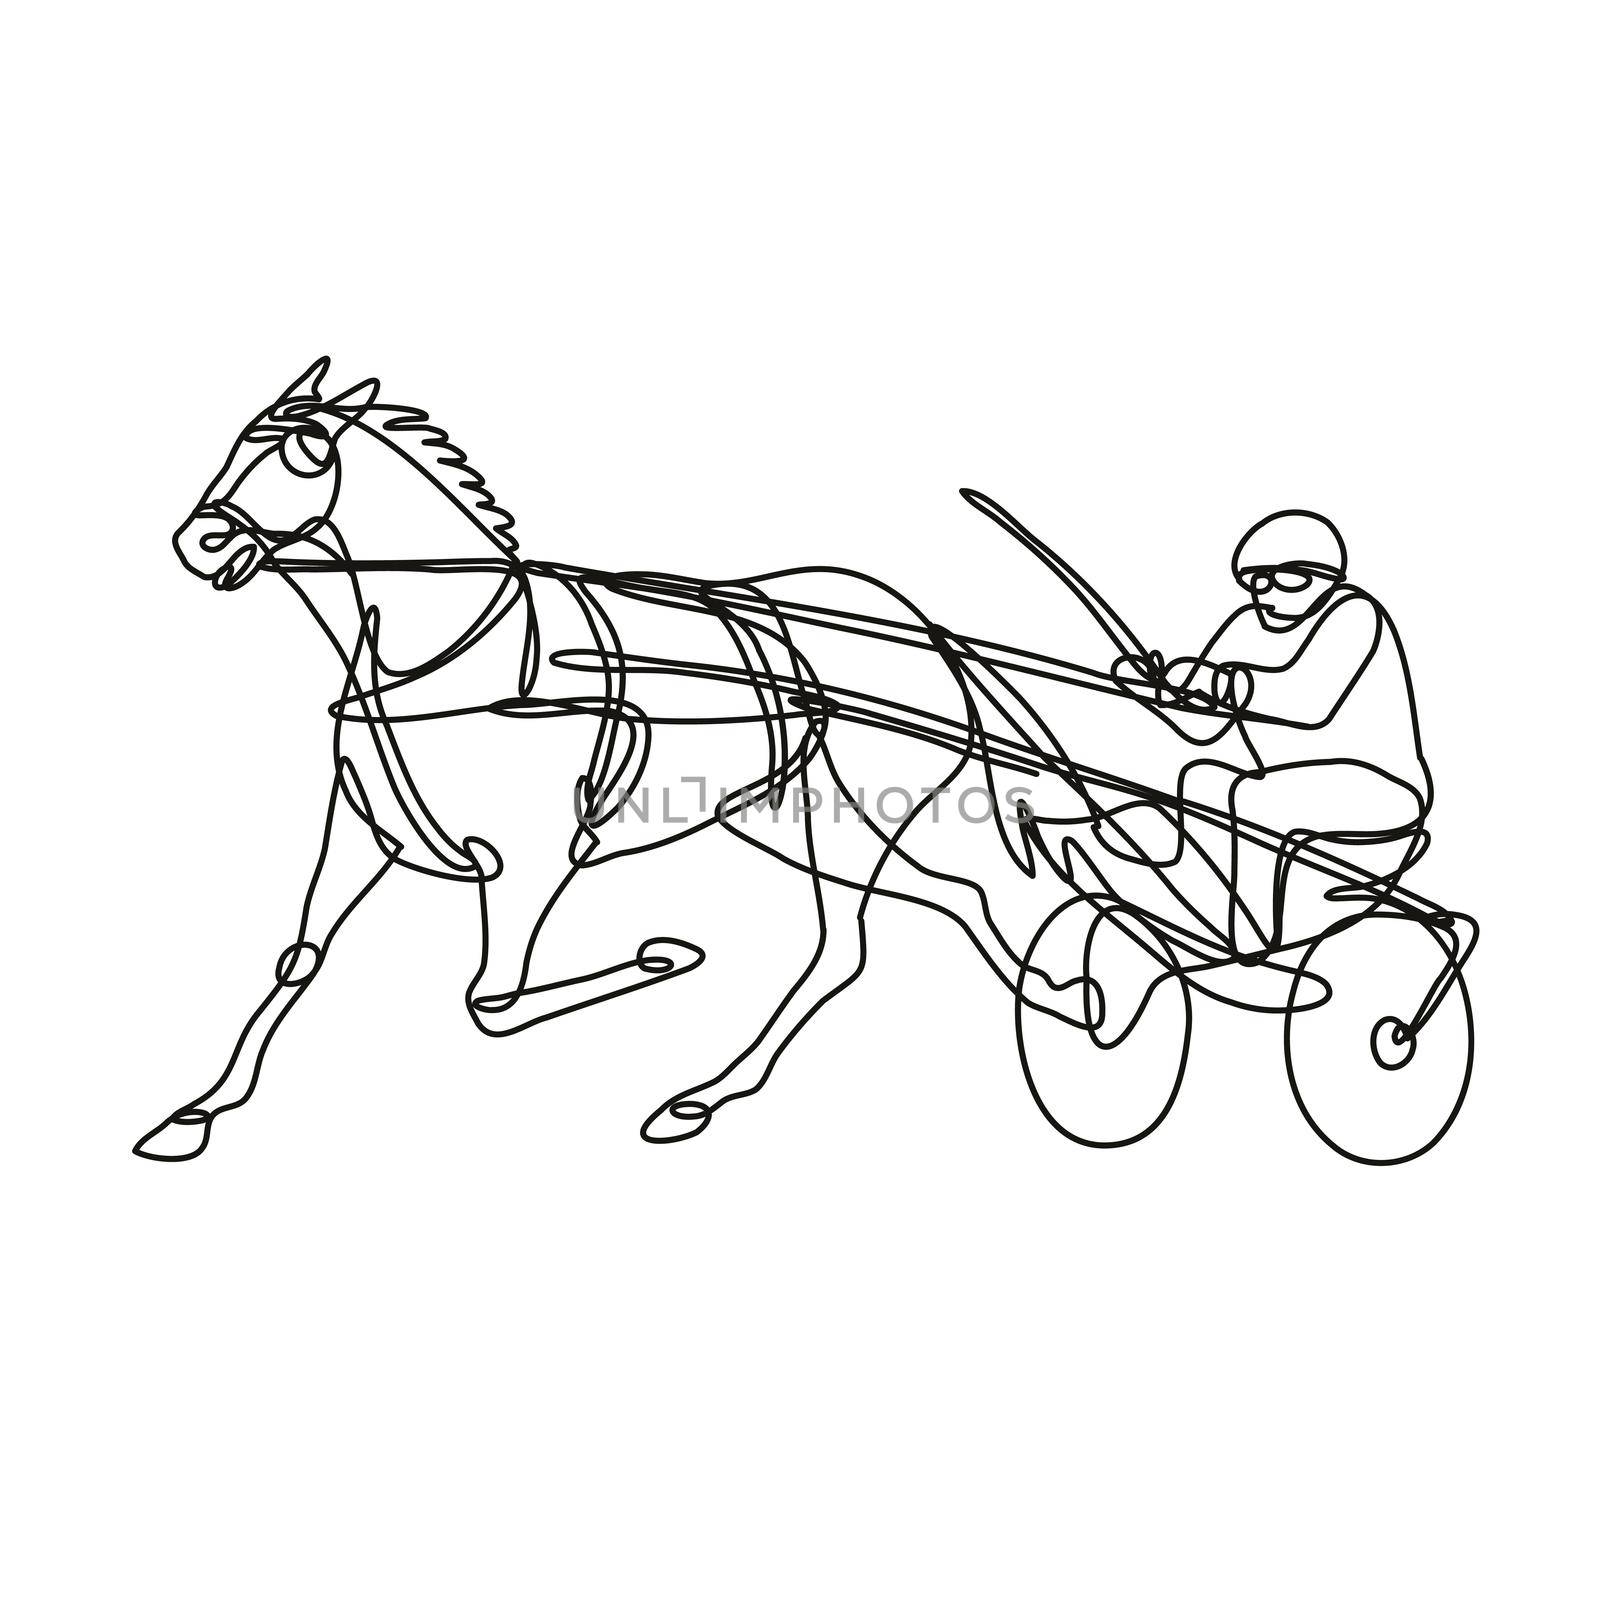 Continuous line drawing illustration of a jockey and horse harness racing side view done in mono line or doodle style in black and white on isolated background. 